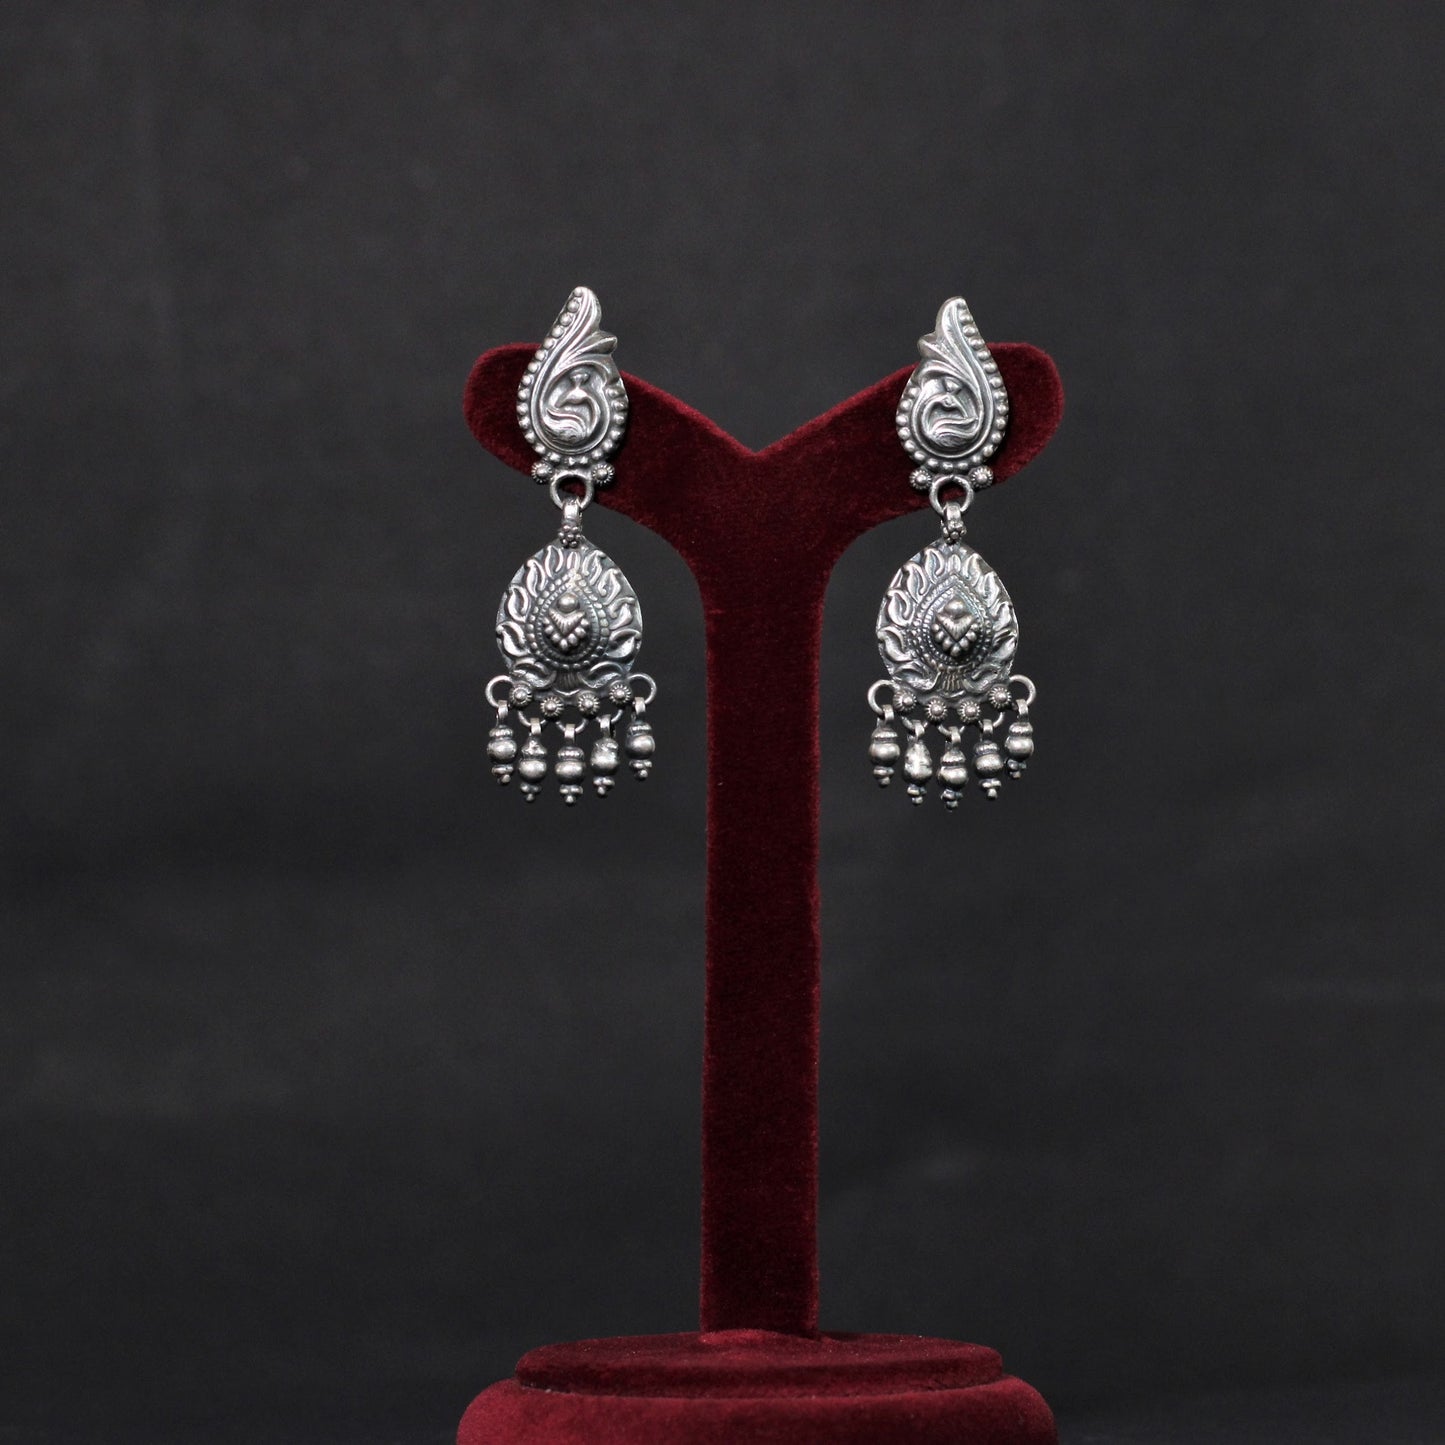 OXIDISED PLATING DANGLERS EARRINGS IN   TRIBAL  COLLECTIONS.